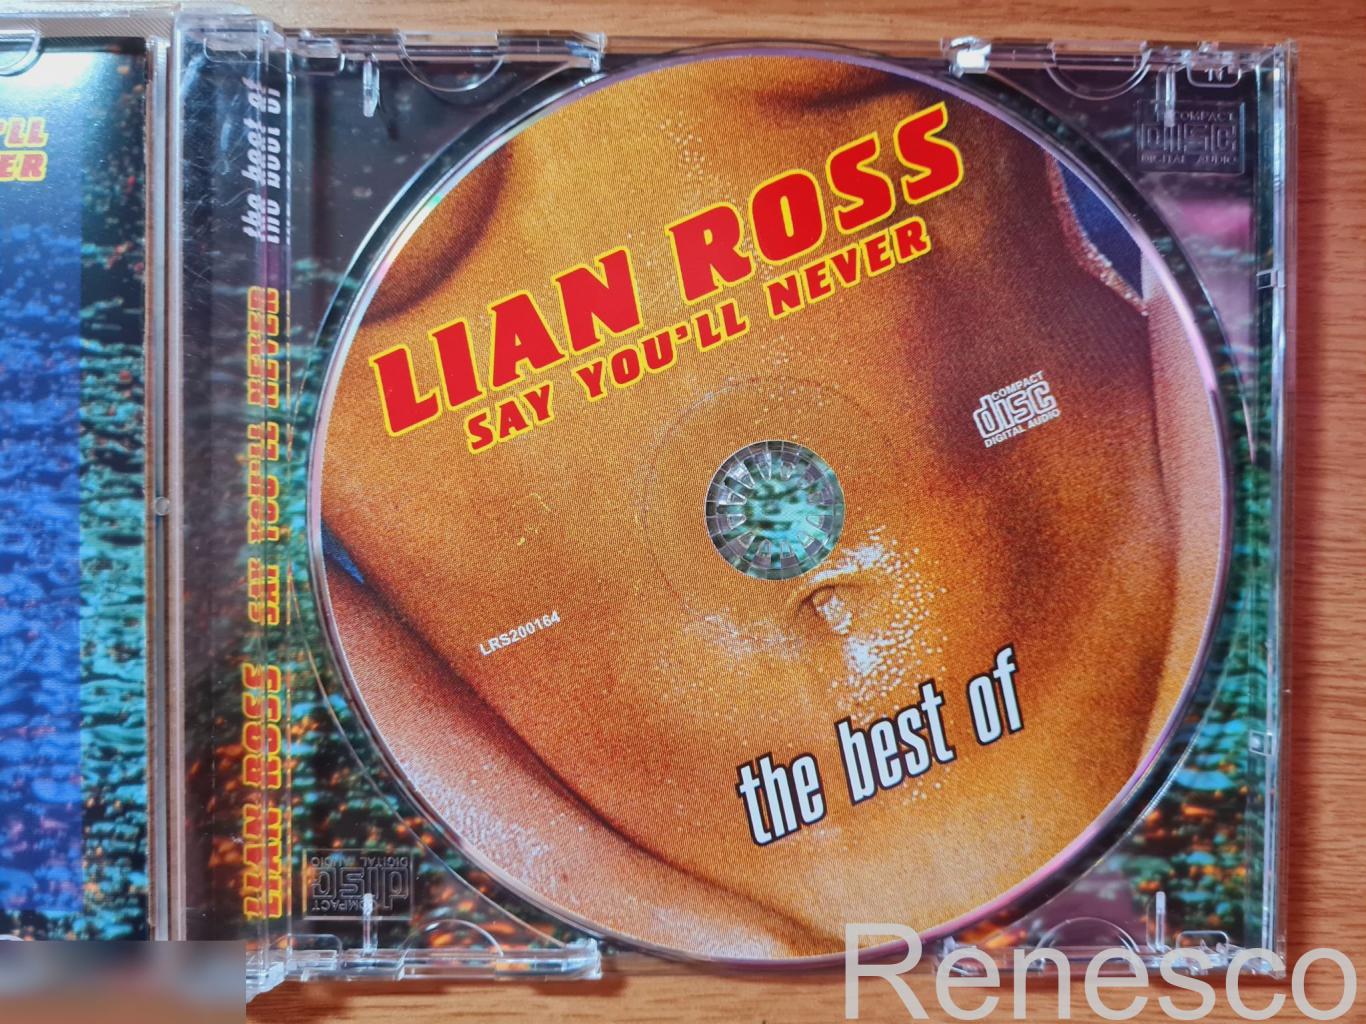 Lian Ross ?– Say You'll Never (The Best Of) (Russia) (2001) (Unofficial Release) 4